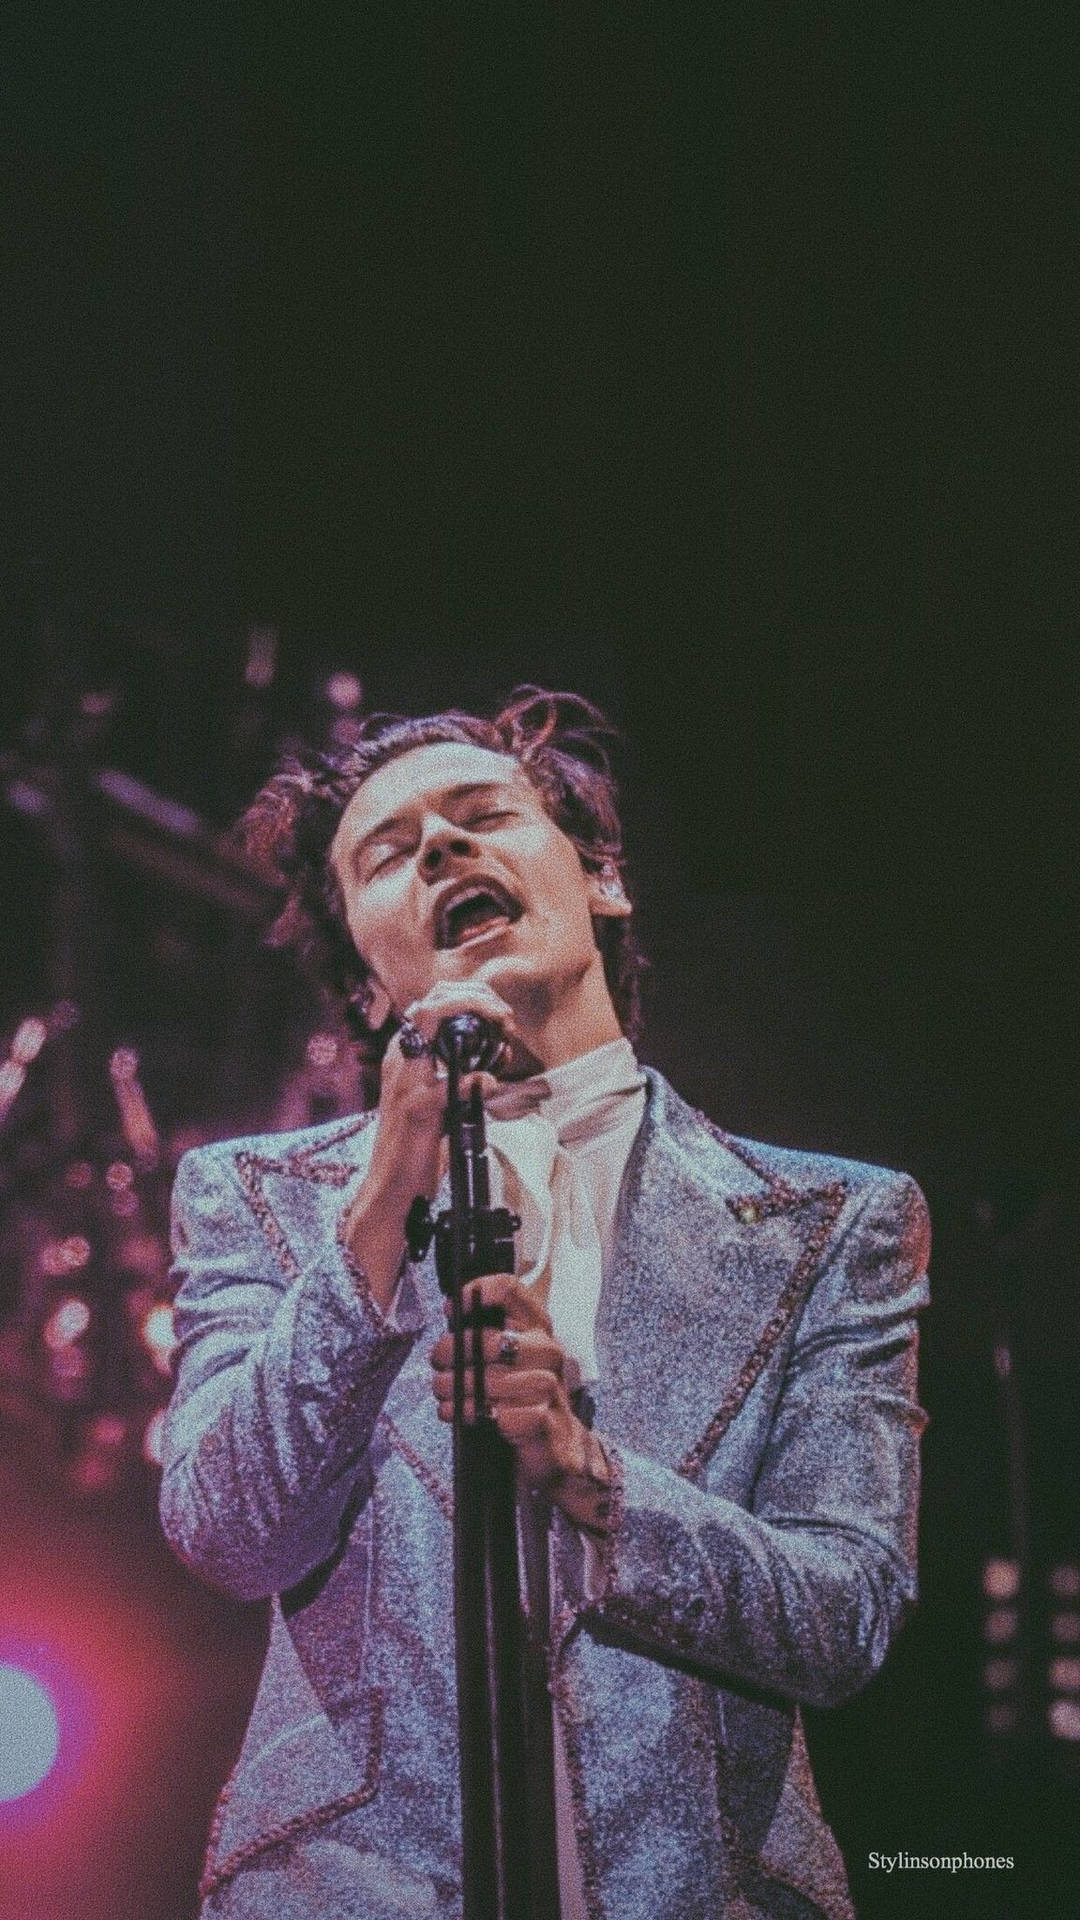 Enjoy Listening Music While You're On-the-go with the Harry Styles iPhone Wallpaper